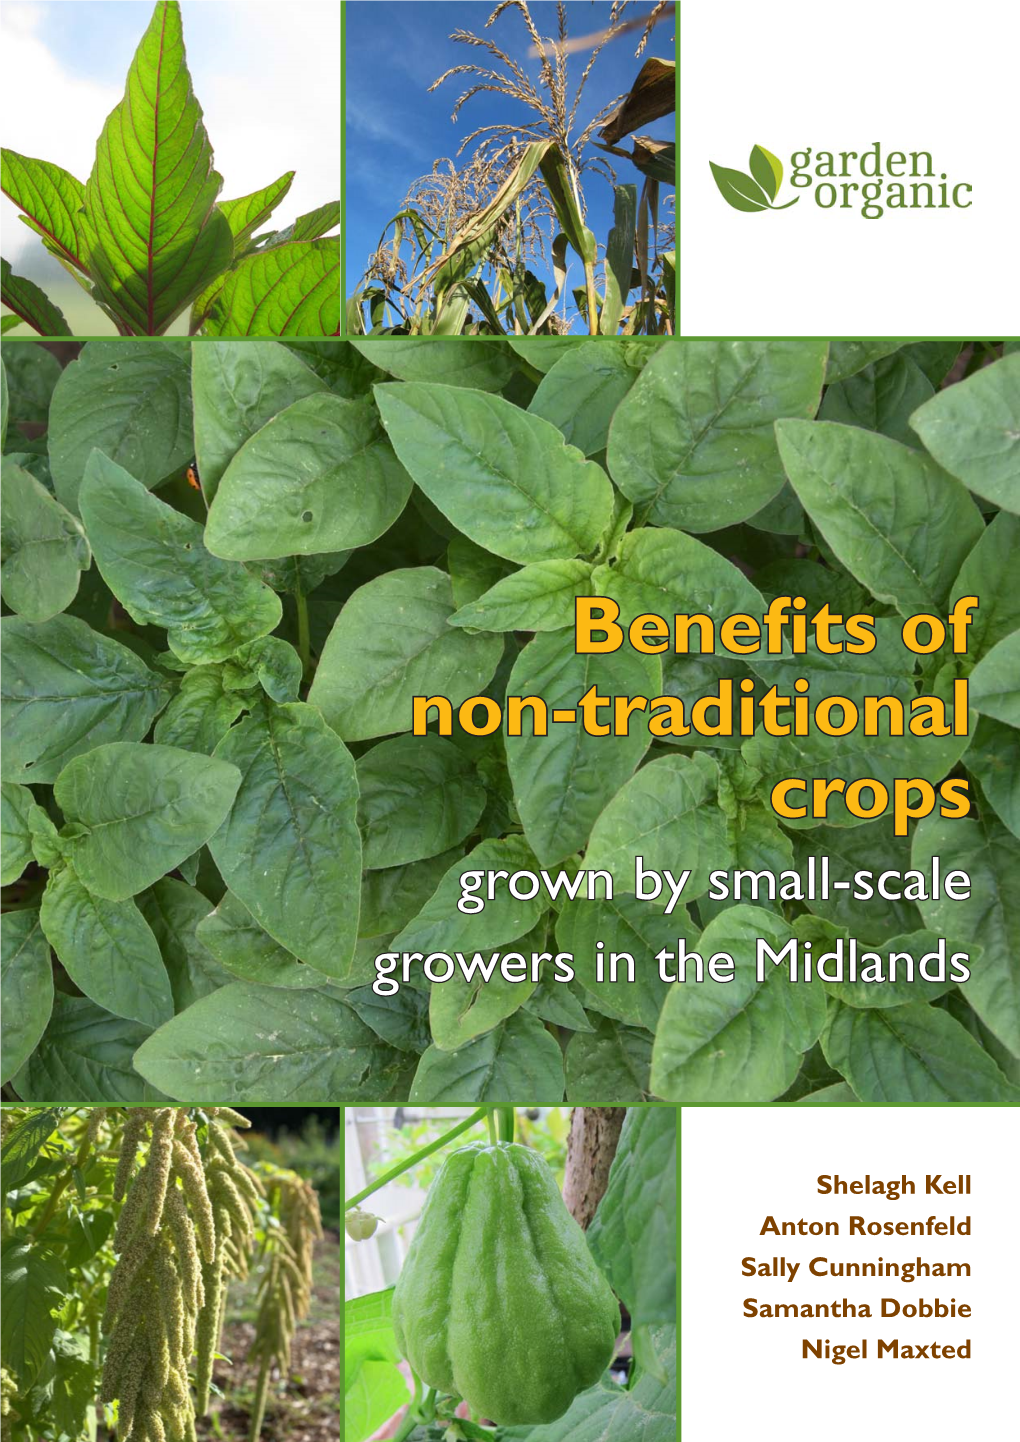 Benefits of Non-Traditional Crops Grown by Small-Scale Growers in the Midlands